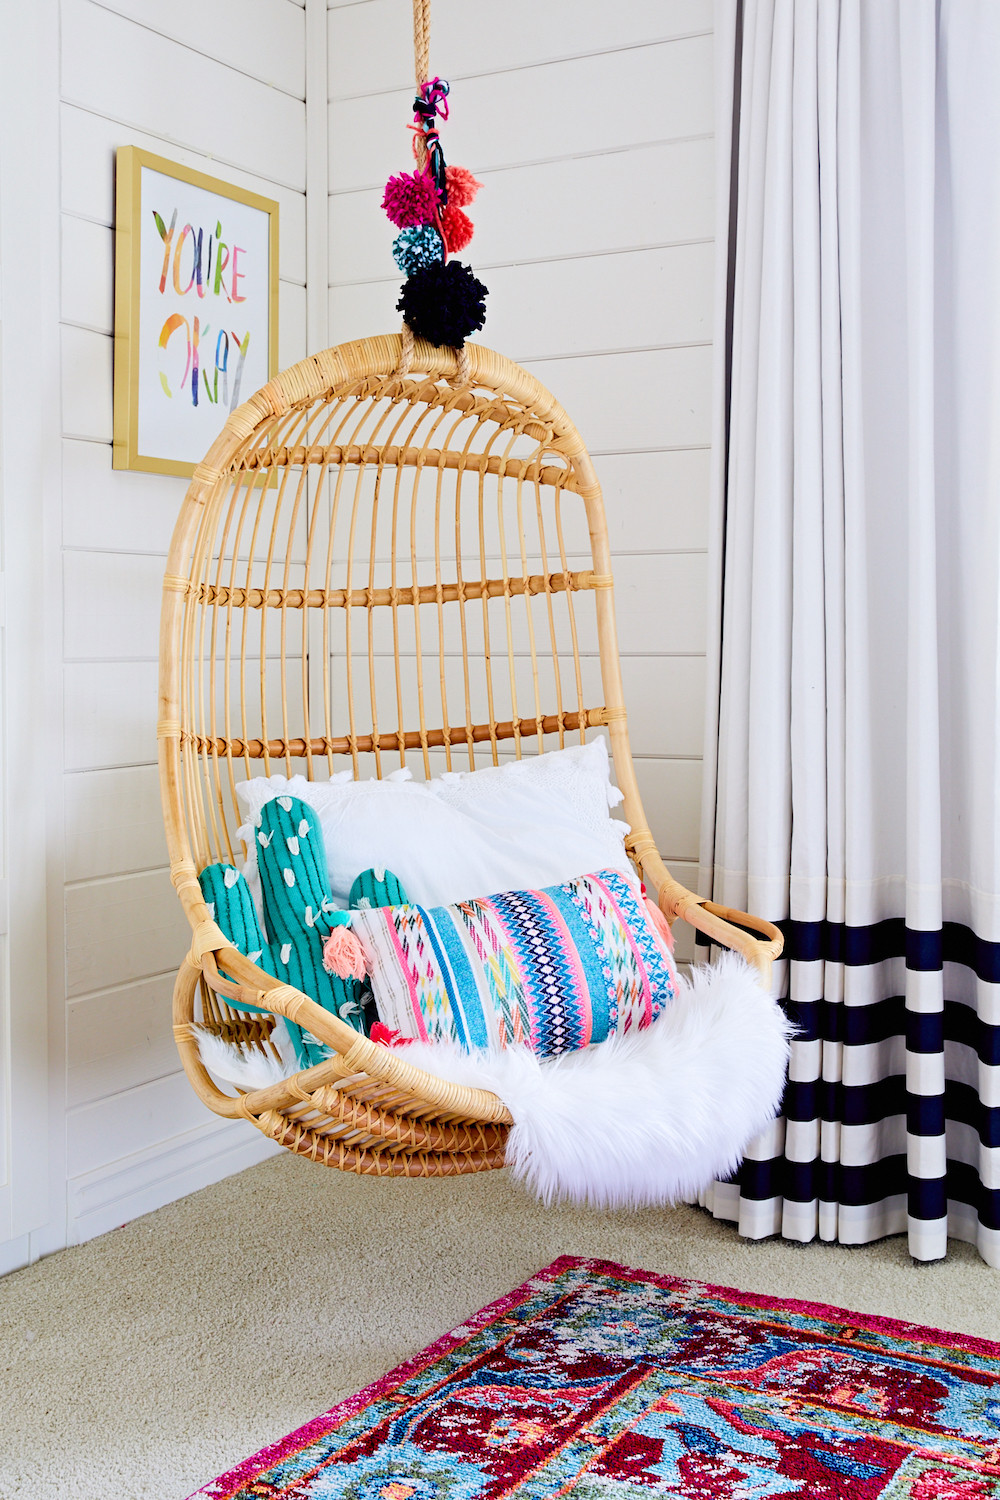 Chair For Kids Rooms
 Trendspotting Hanging Chairs are Swinging into Kids